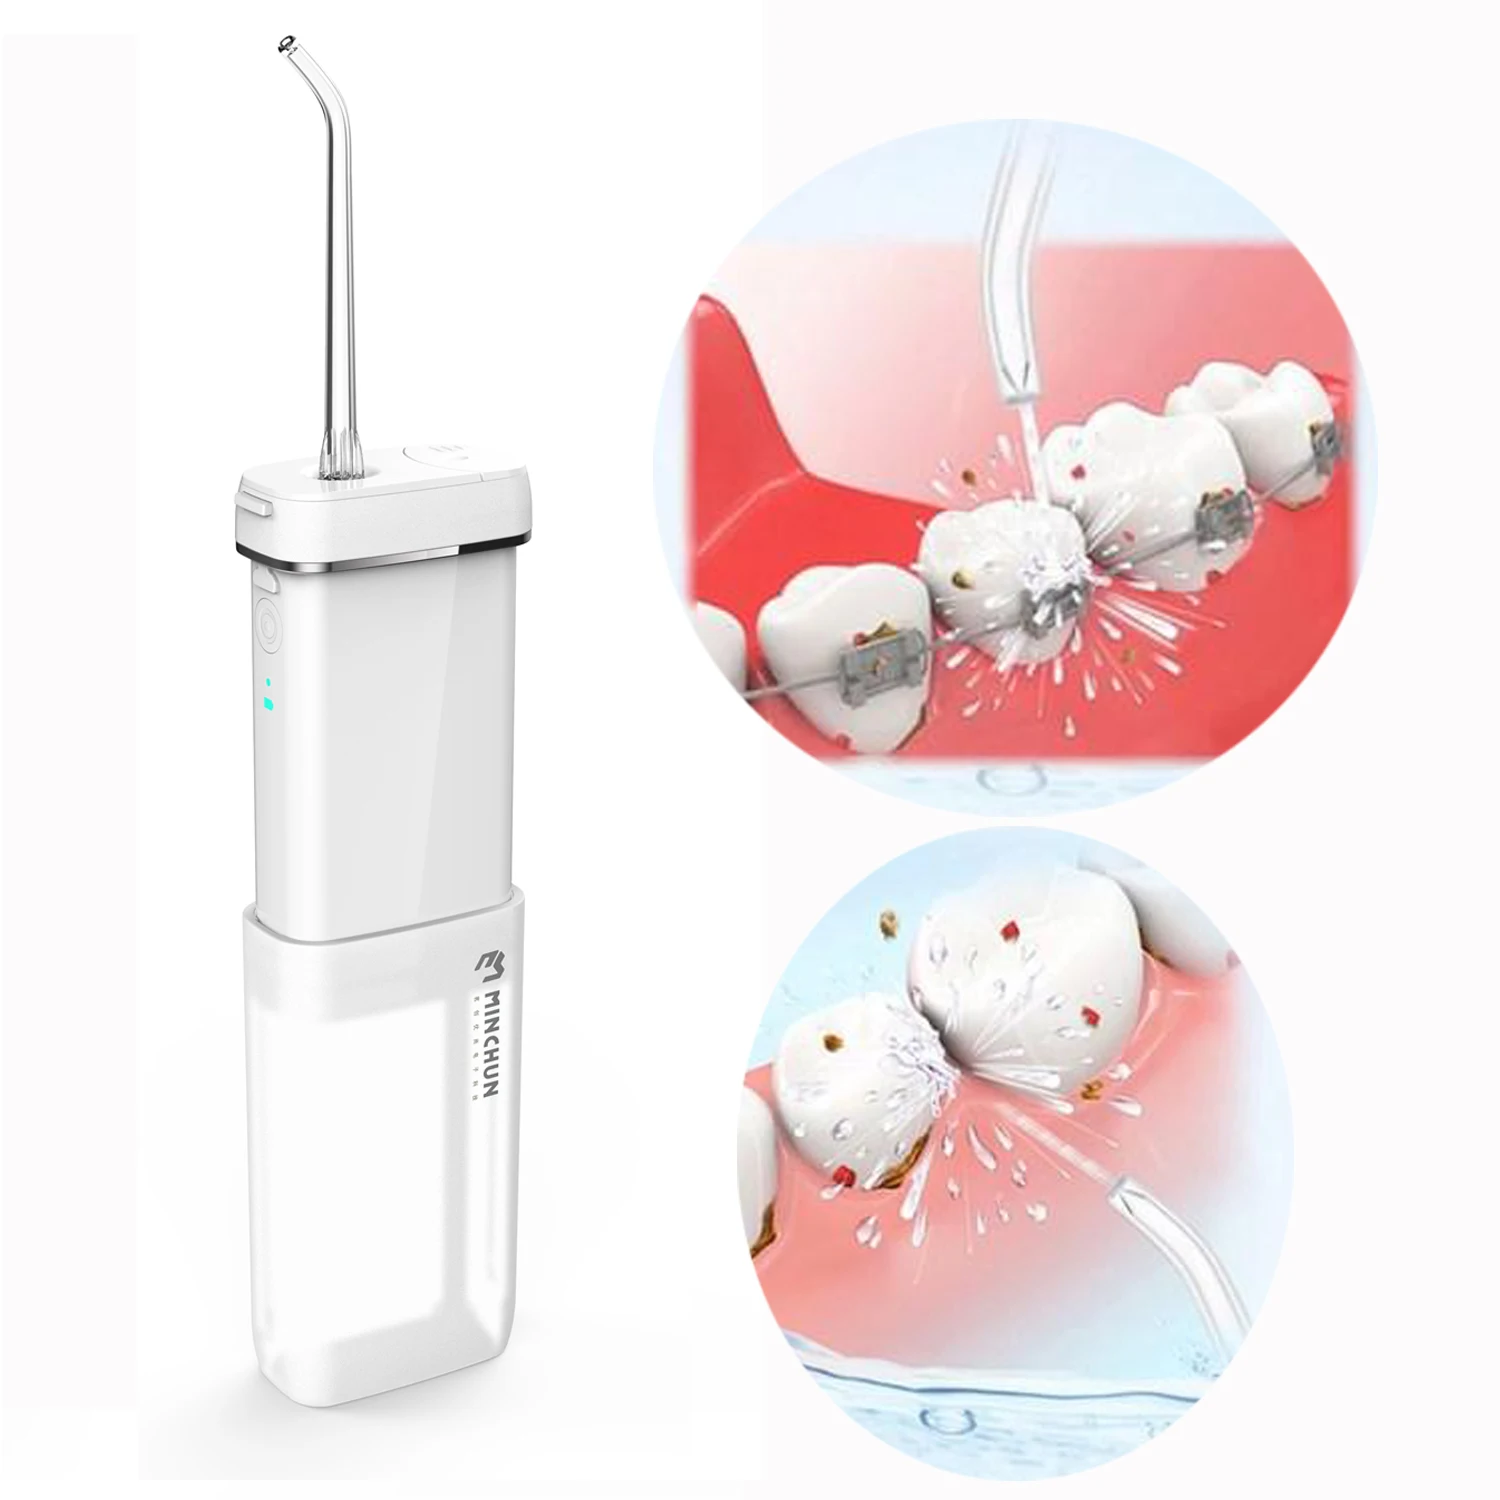 

Home and travel use dental care portable electric water pick floss cordless oral irrigator wireless tooth jet water flosser, White/pink/blue